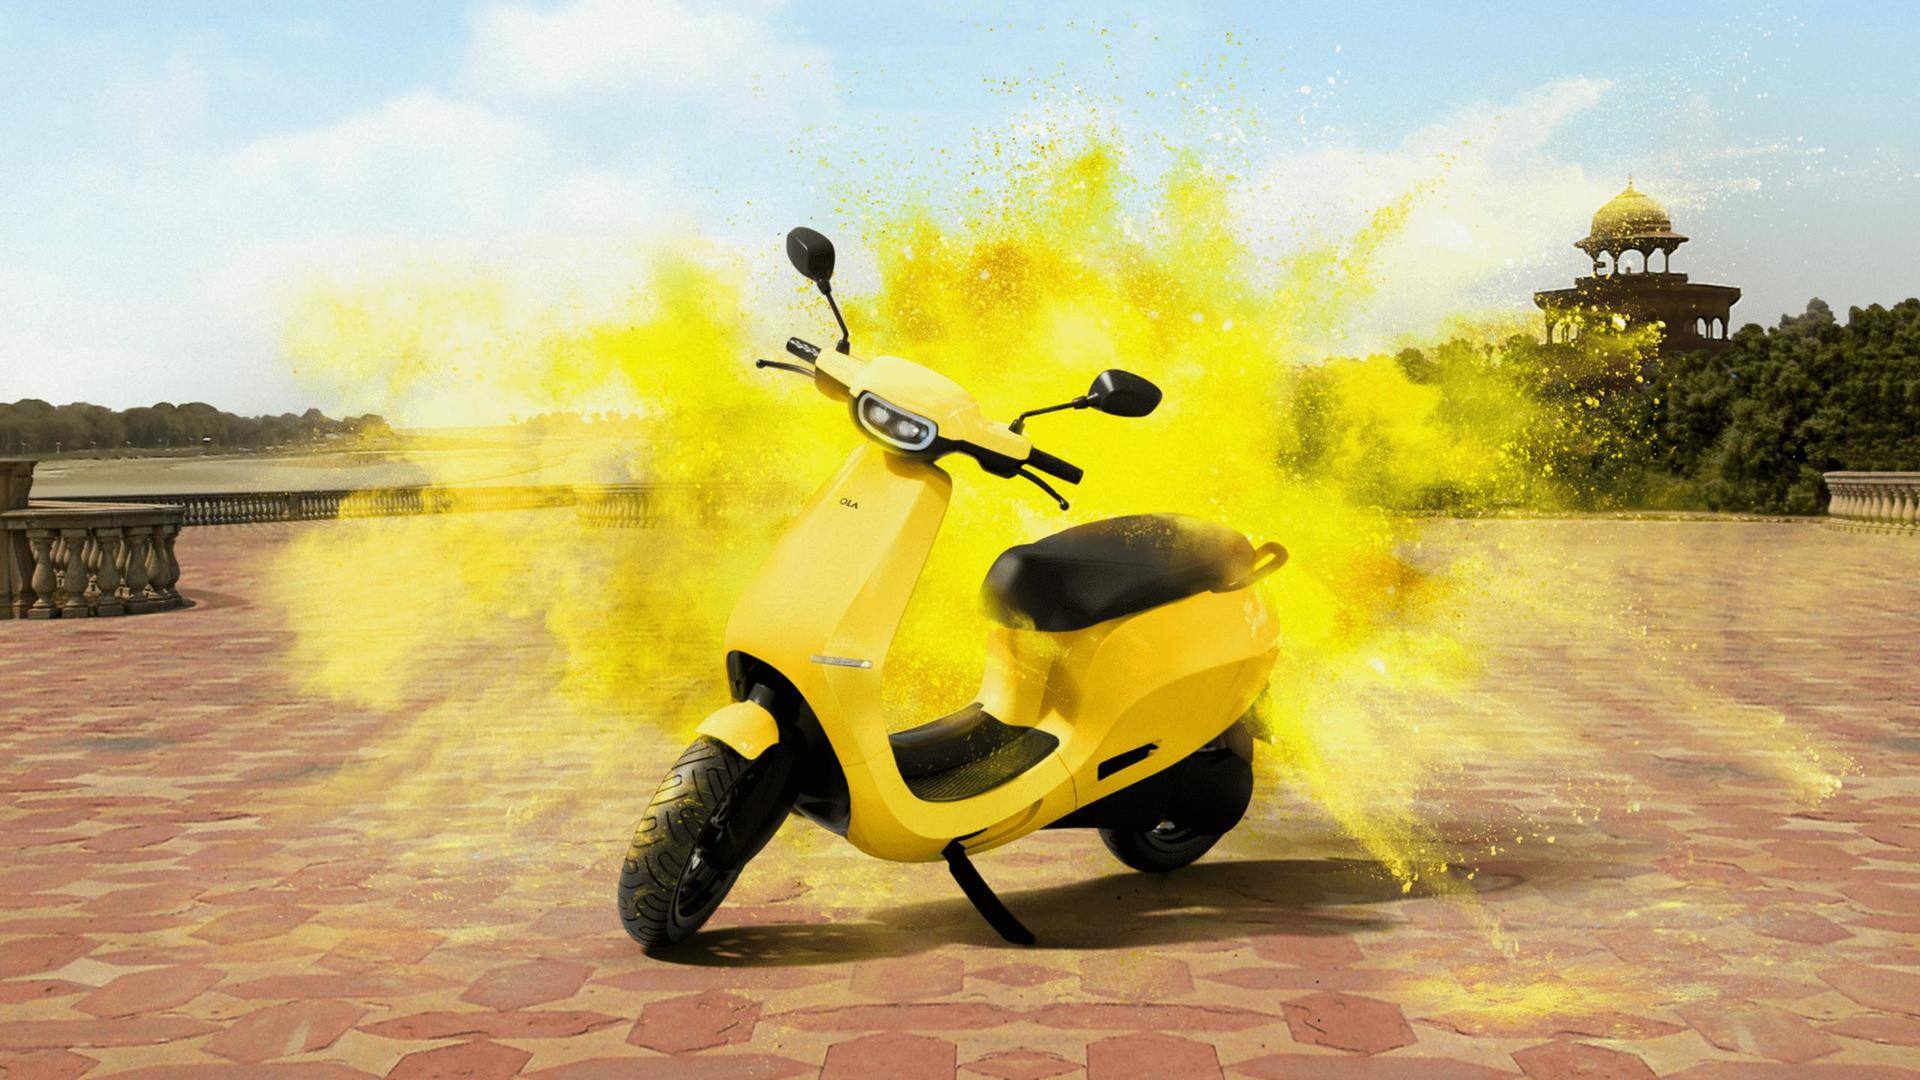 FAME II subsidy revision: Electric two-wheelers may soon become costlier